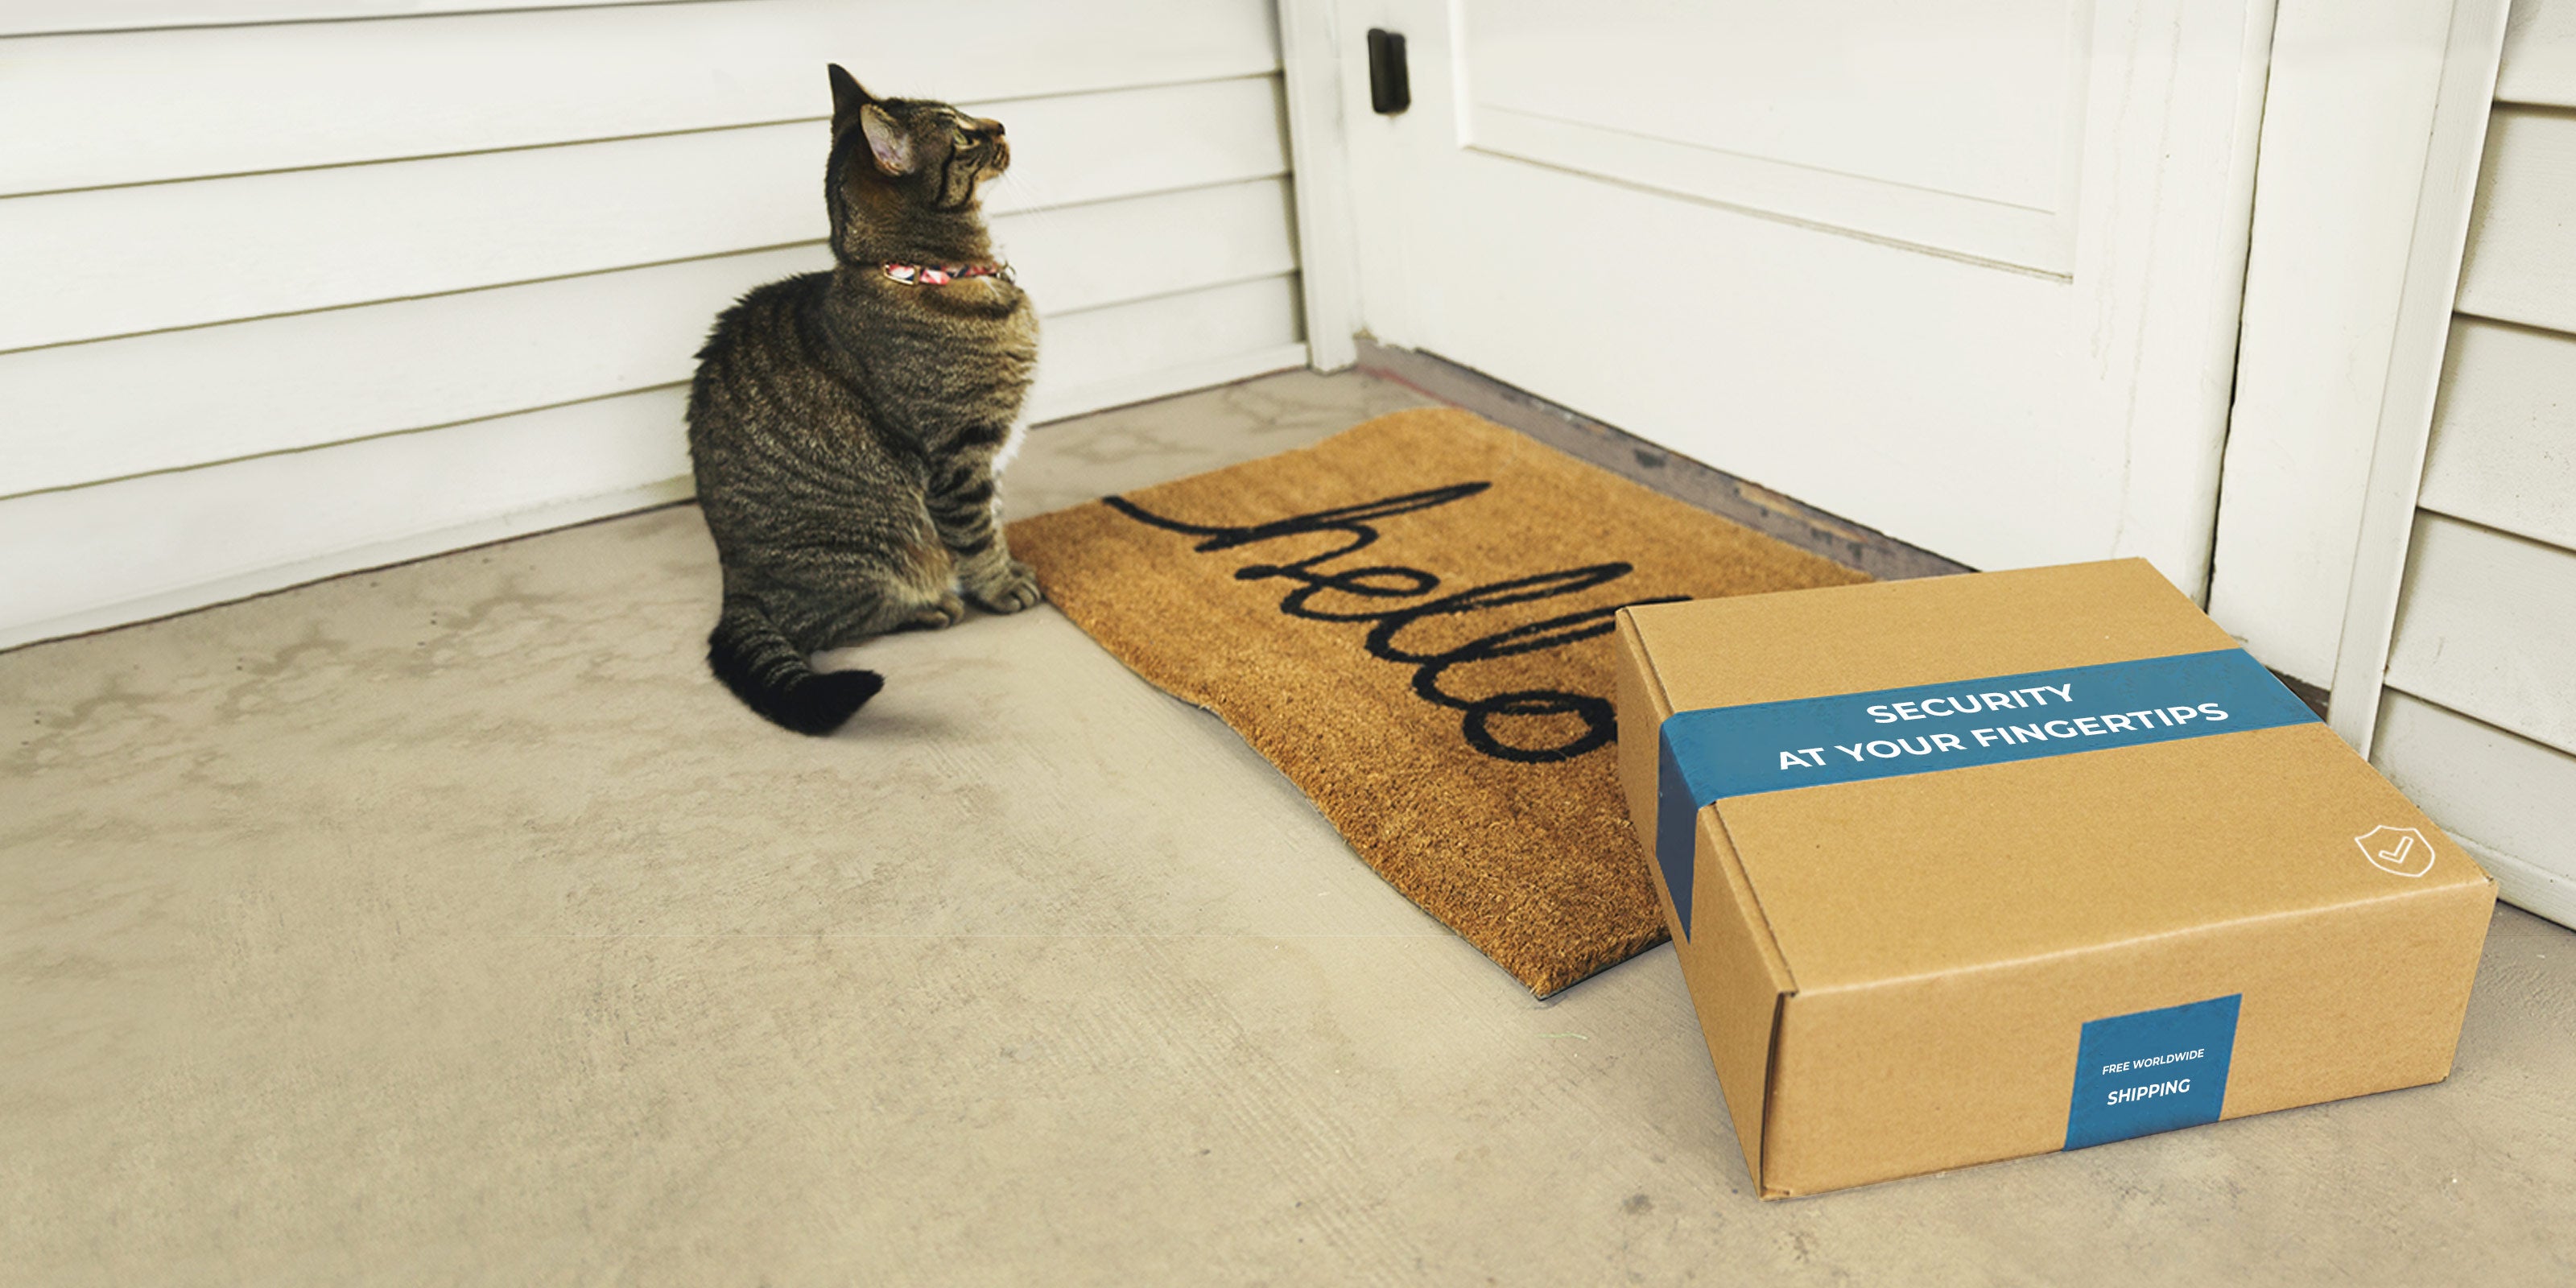 Cat standing by home doorstep along a delivered parcel with the tag "Security at your fingerprints"